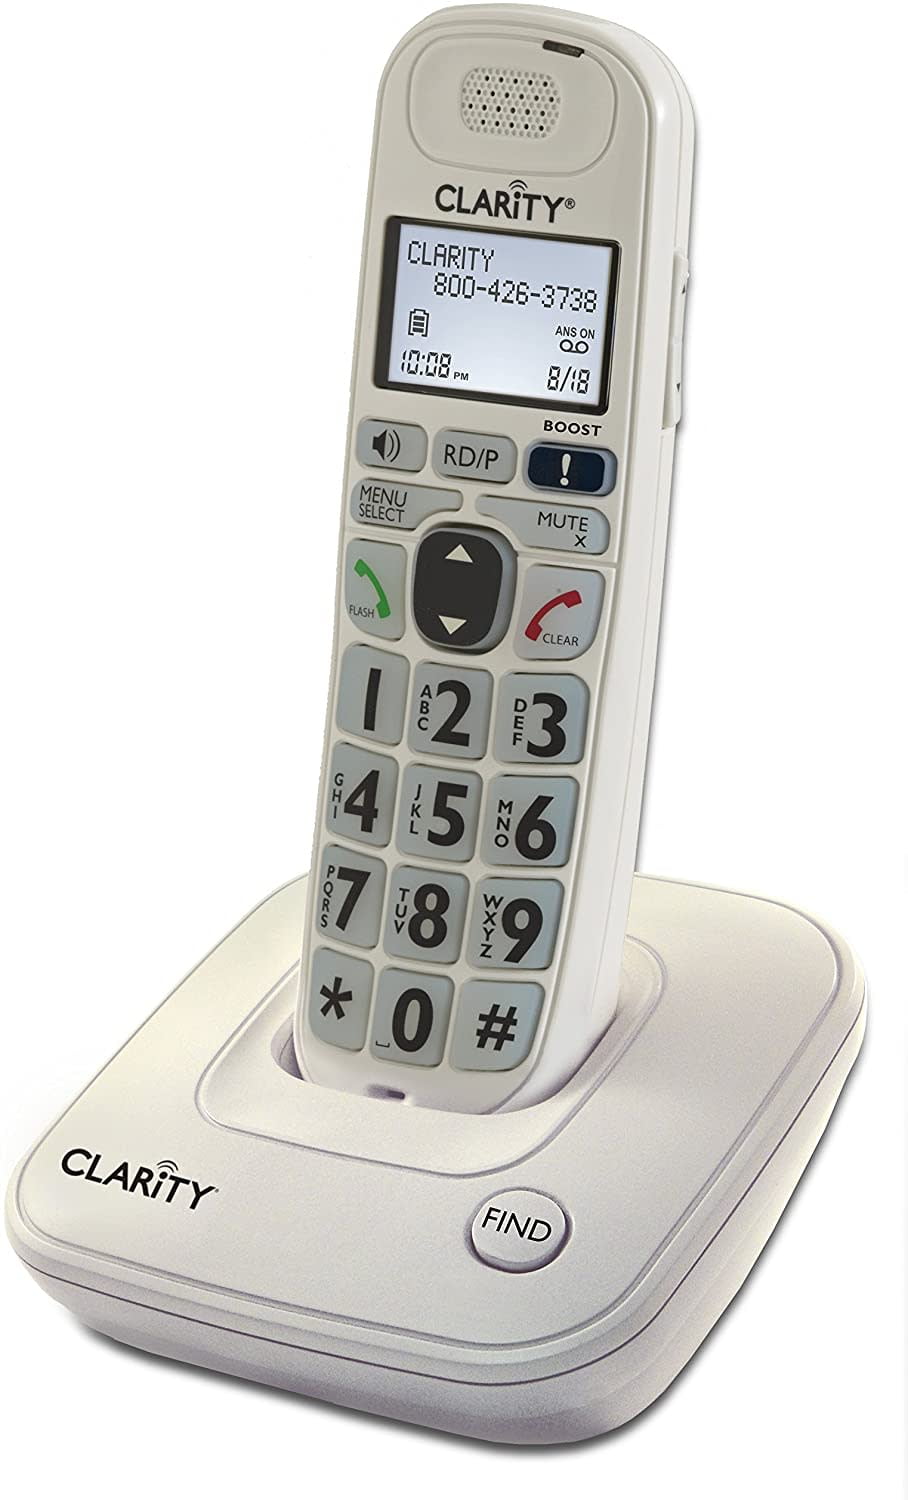 Clarity Amplified/Low Vision Cordless Phone with CID Display, White